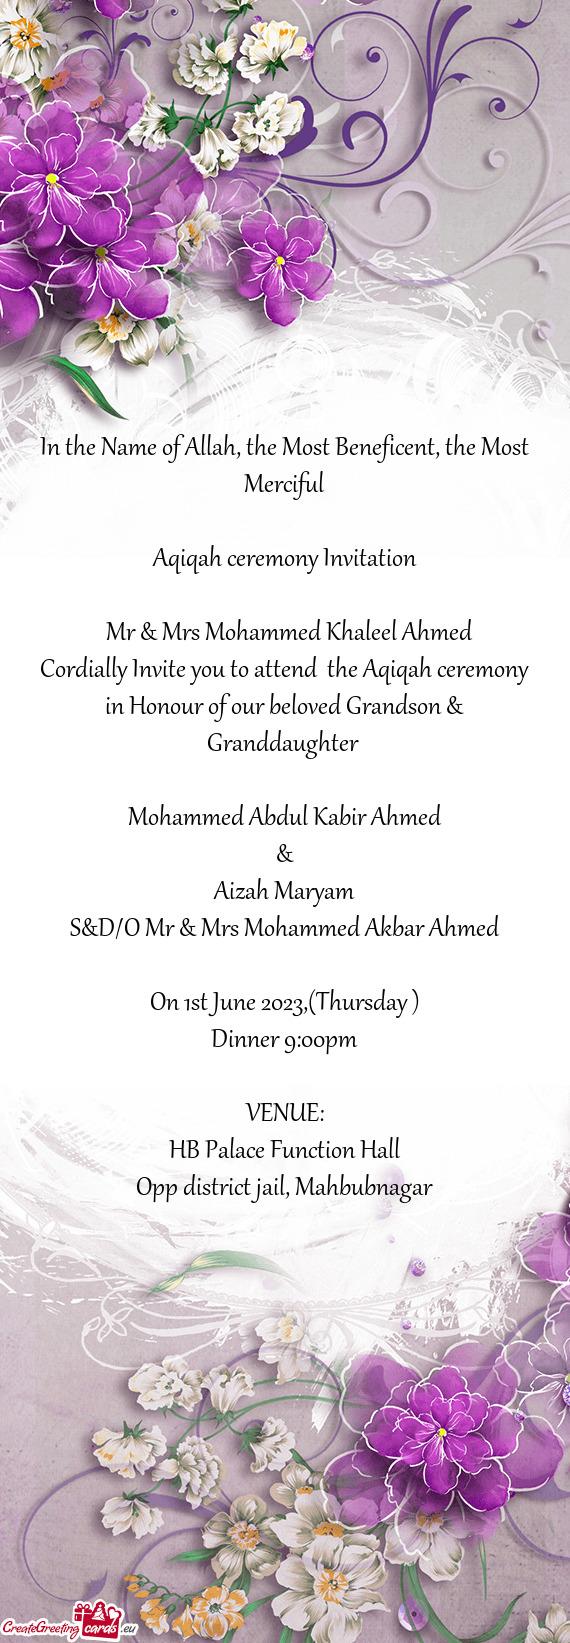 Cordially Invite you to attend the Aqiqah ceremony in Honour of our beloved Grandson & Granddaughte